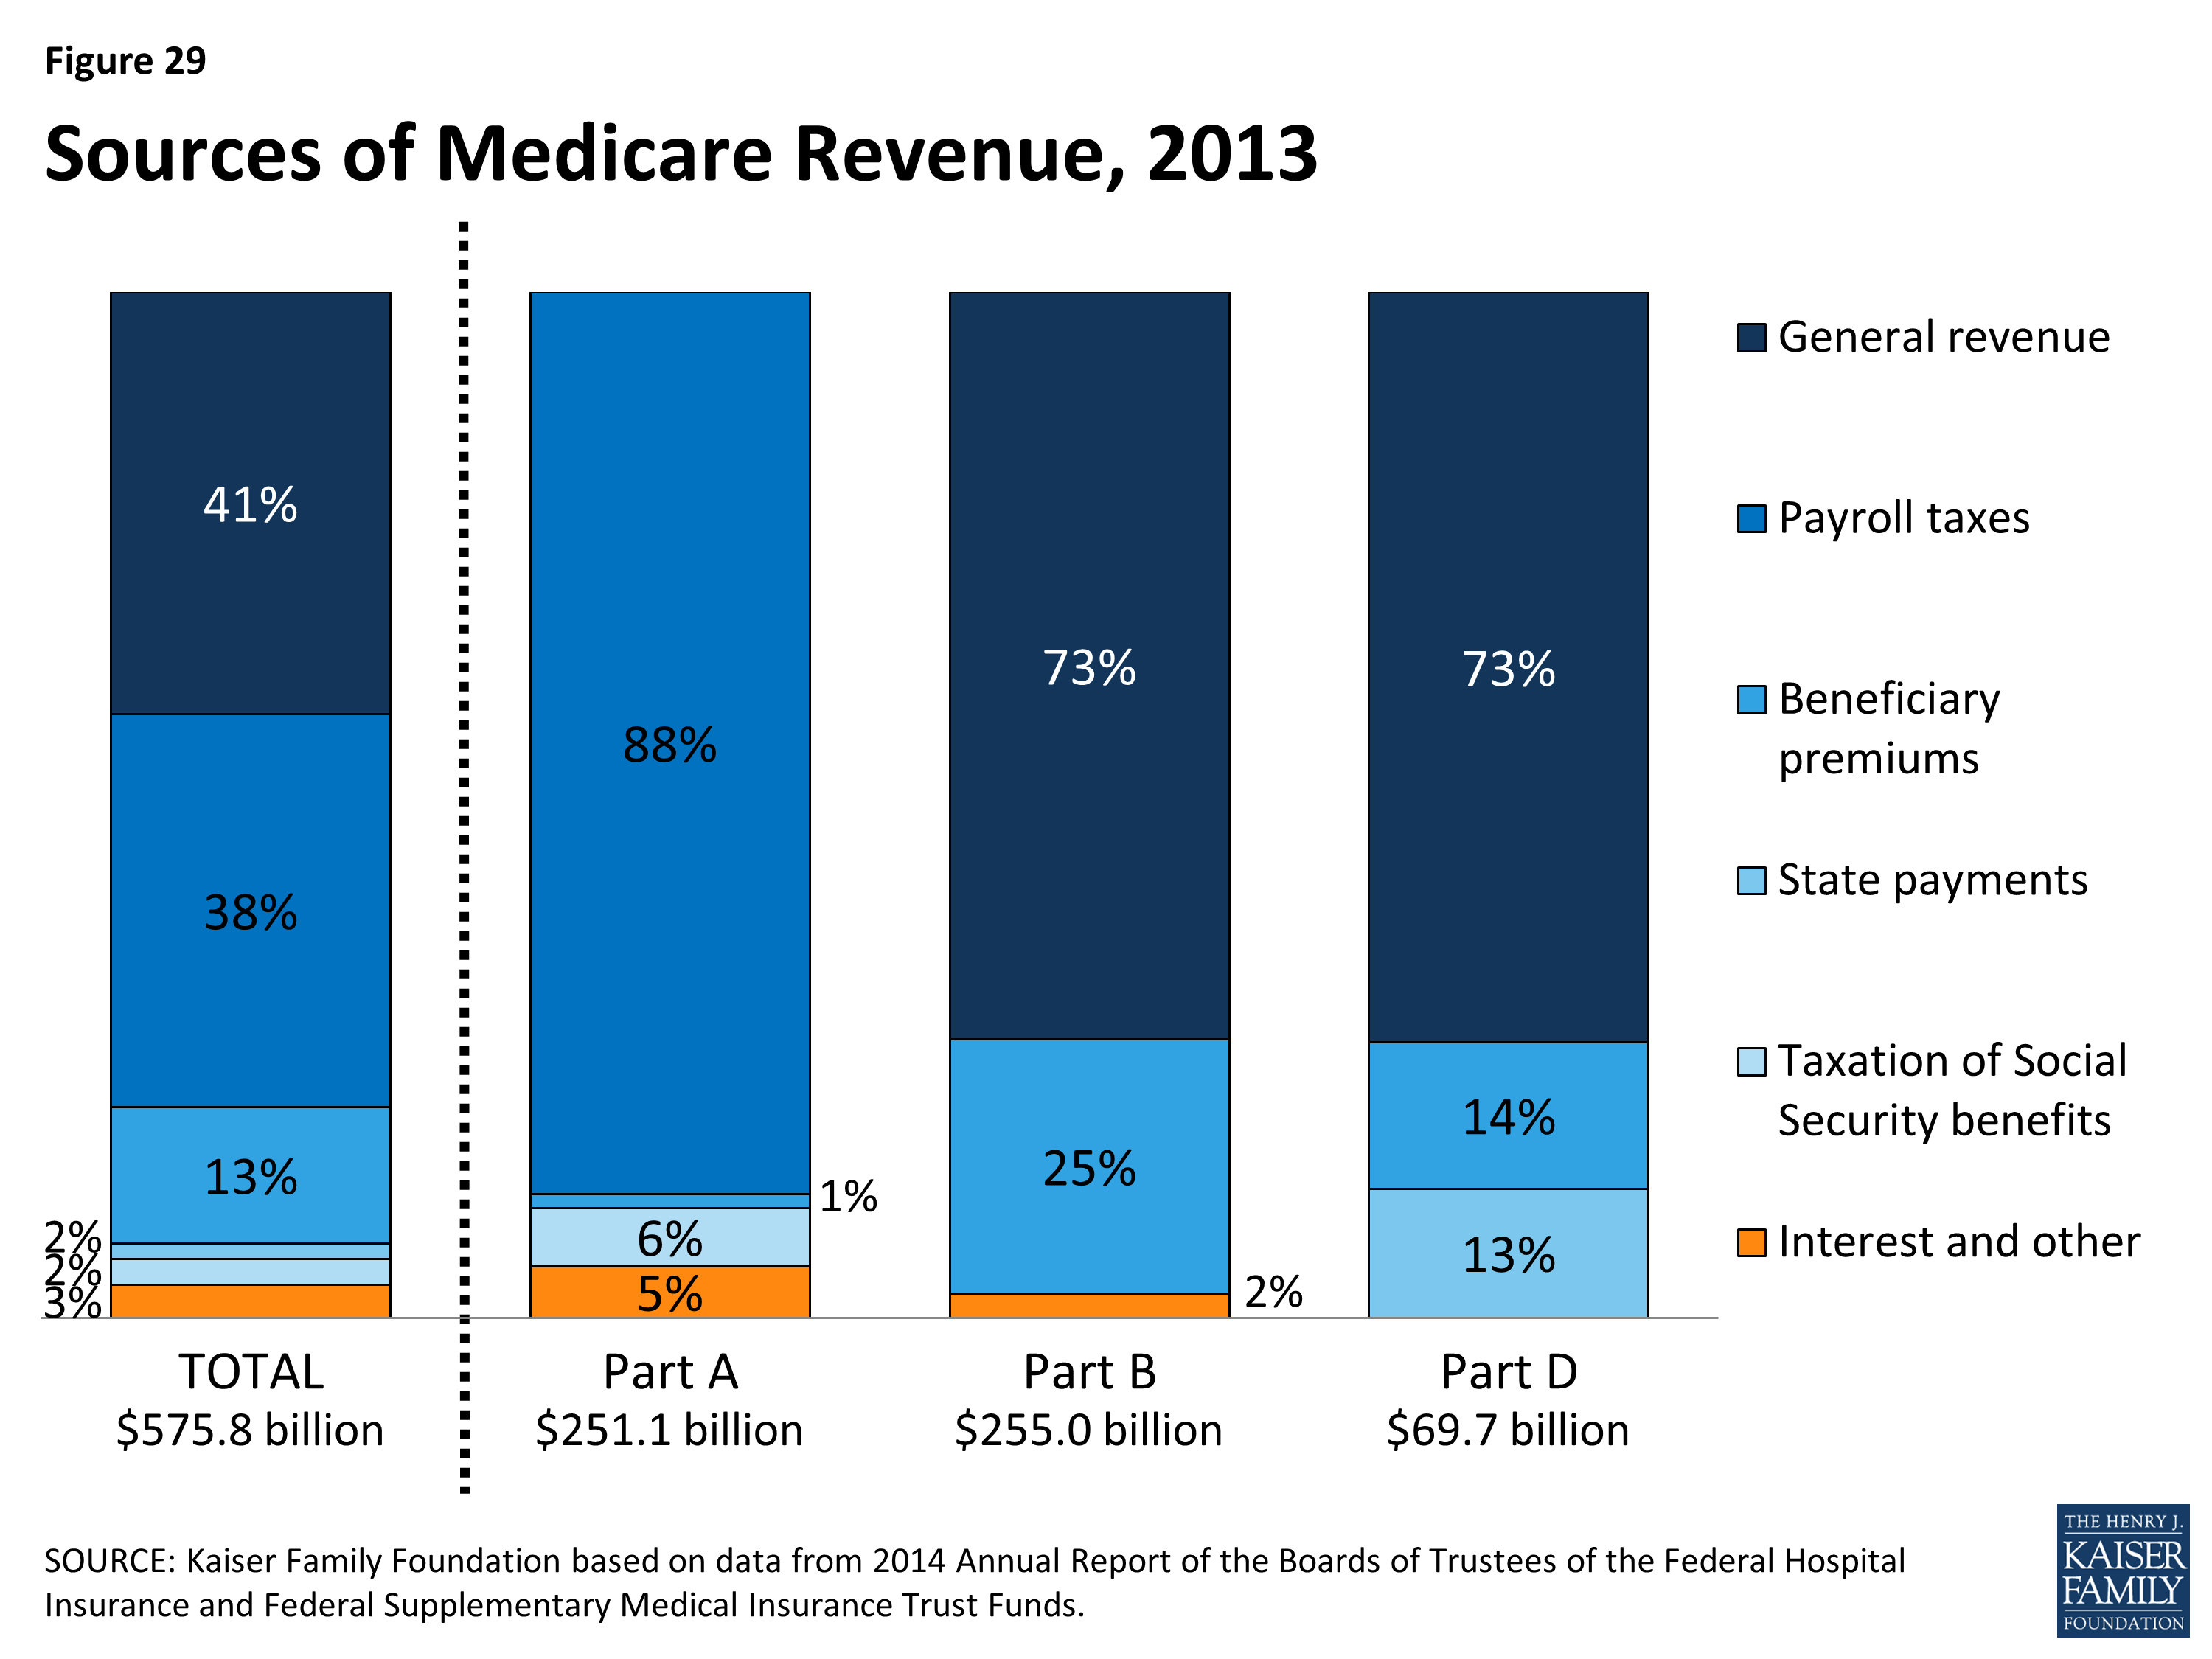 A Primer on Medicare How is Medicare financed and what are Medicare's